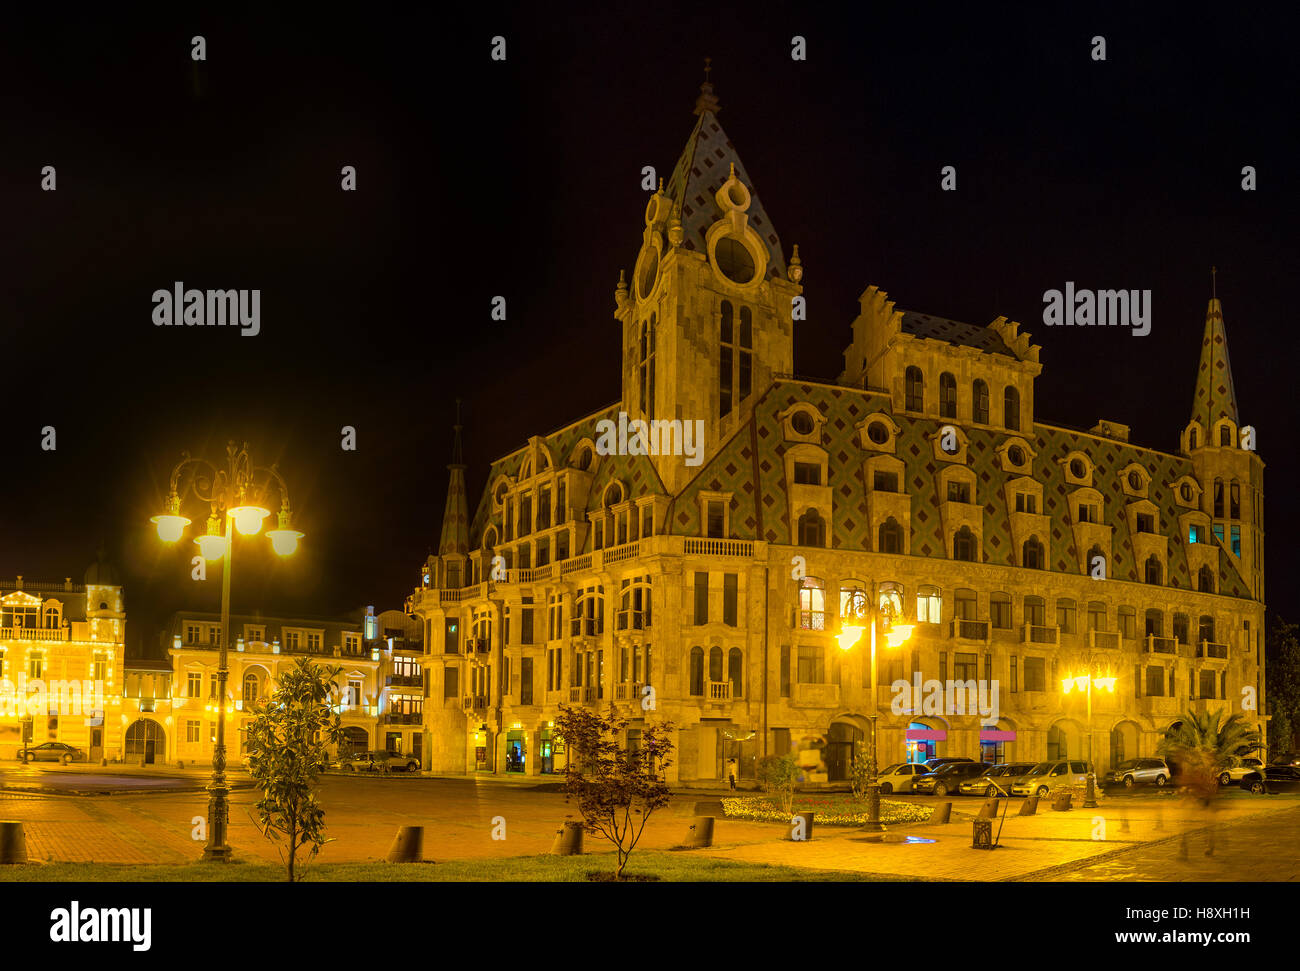 The Europe Square is one of the most beautiful locations in city, especially in bright illumination, Batumi, Georgia. Stock Photo